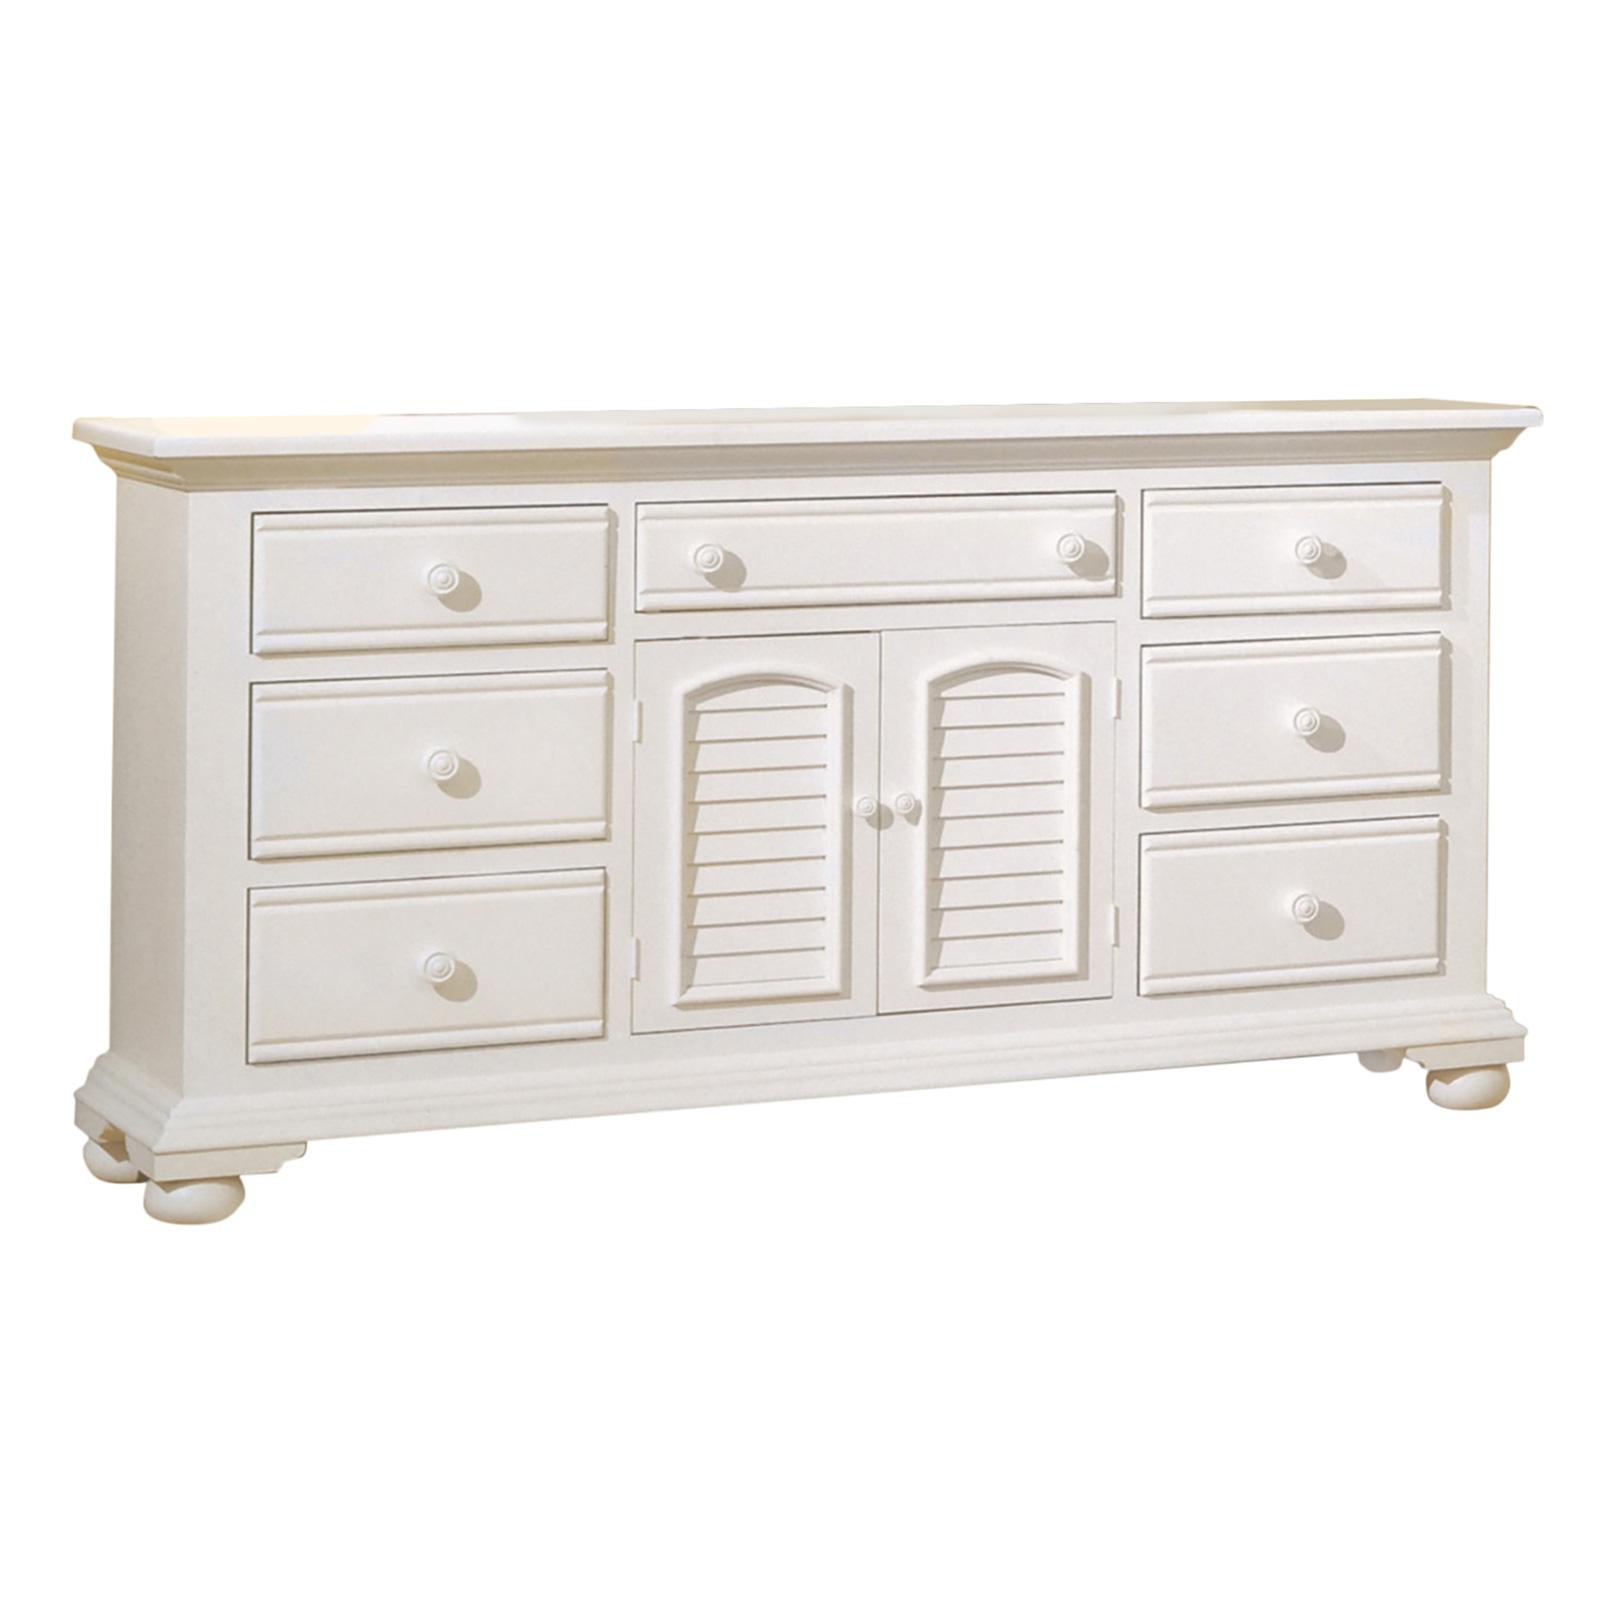 Classic, Traditional, Cottage Dresser COTTAGE 6510-272 6510-272 in White 